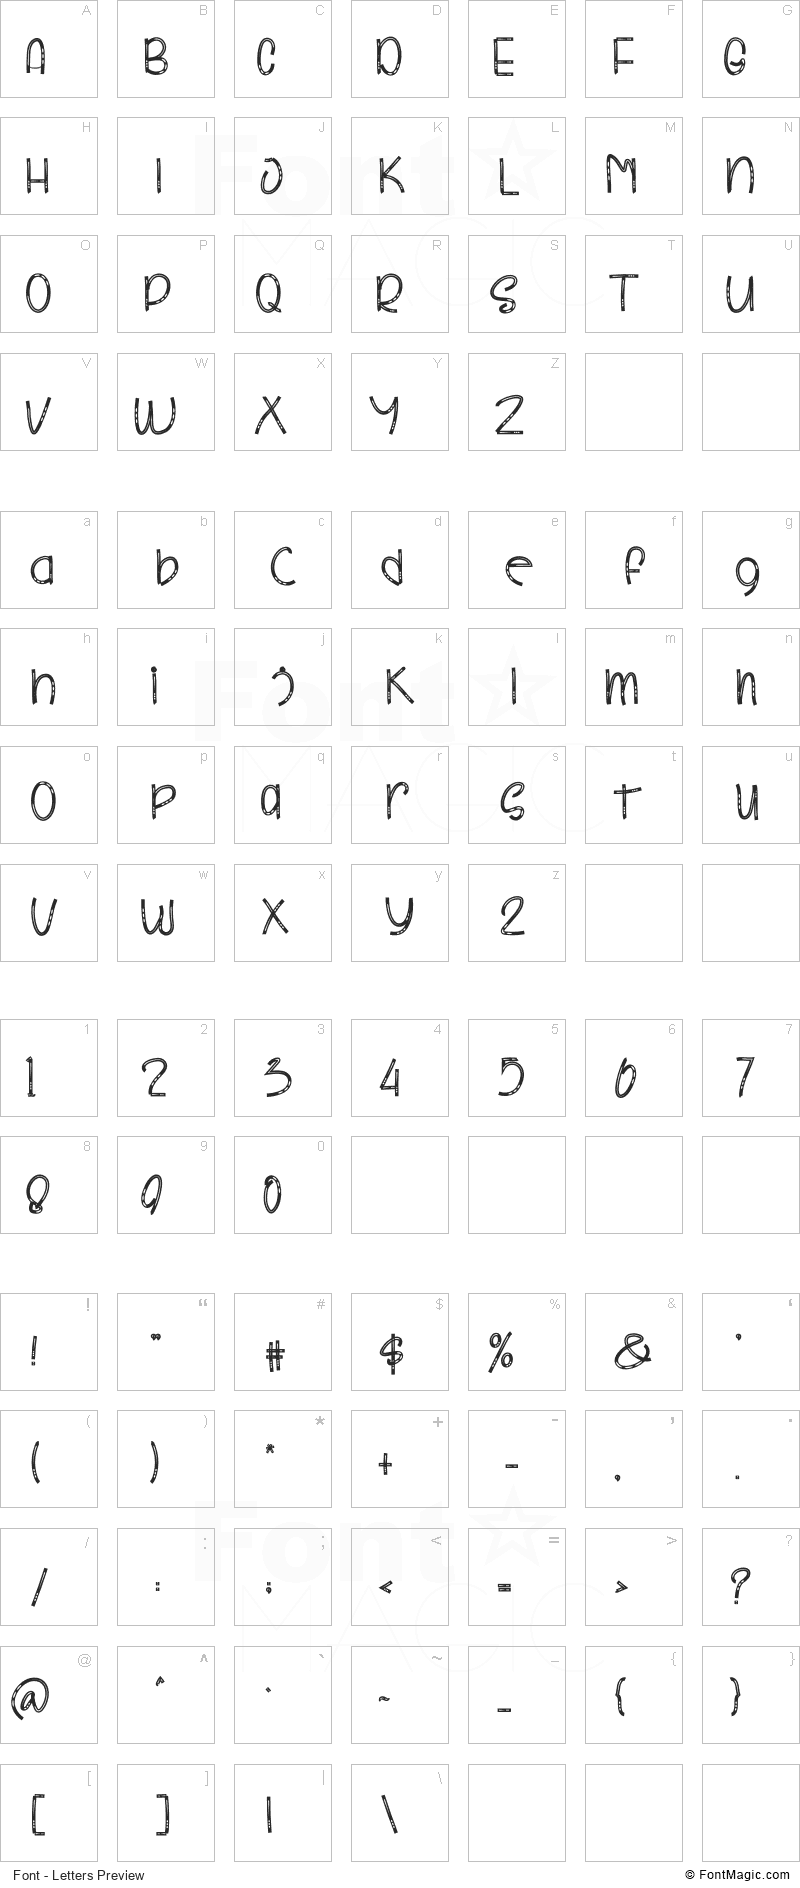 Hello Moon Font - All Latters Preview Chart